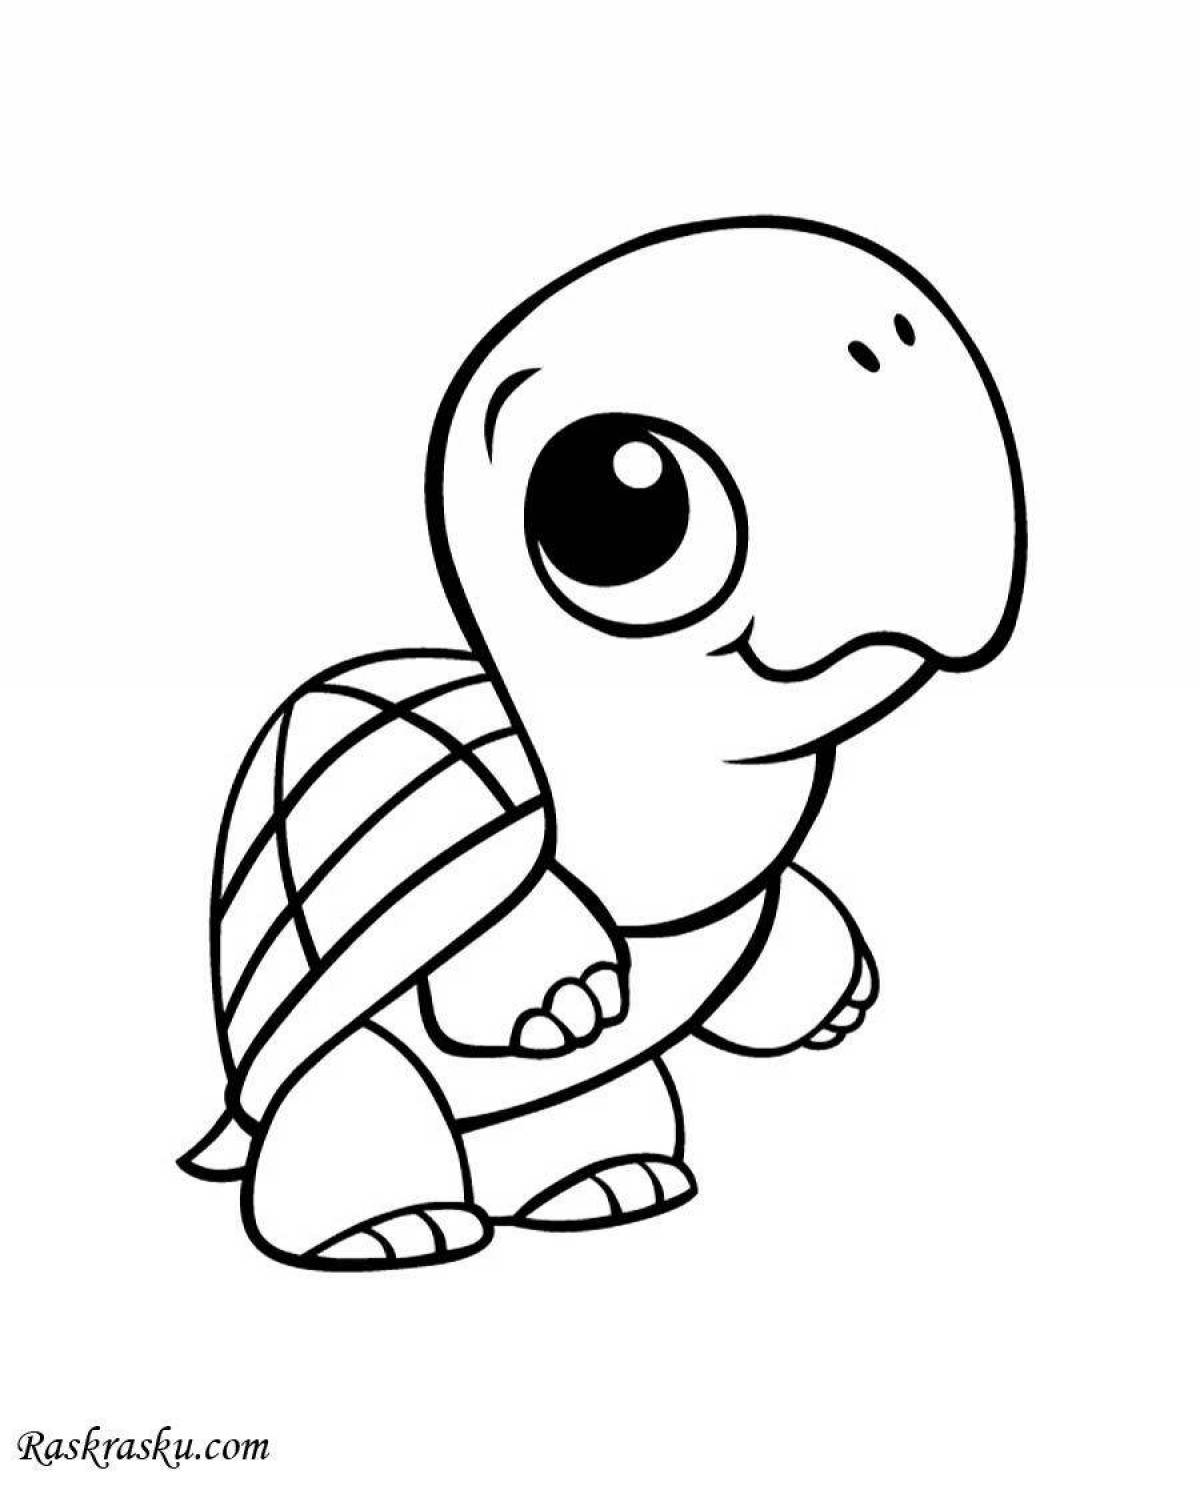 Sweet turtle coloring pages for kids